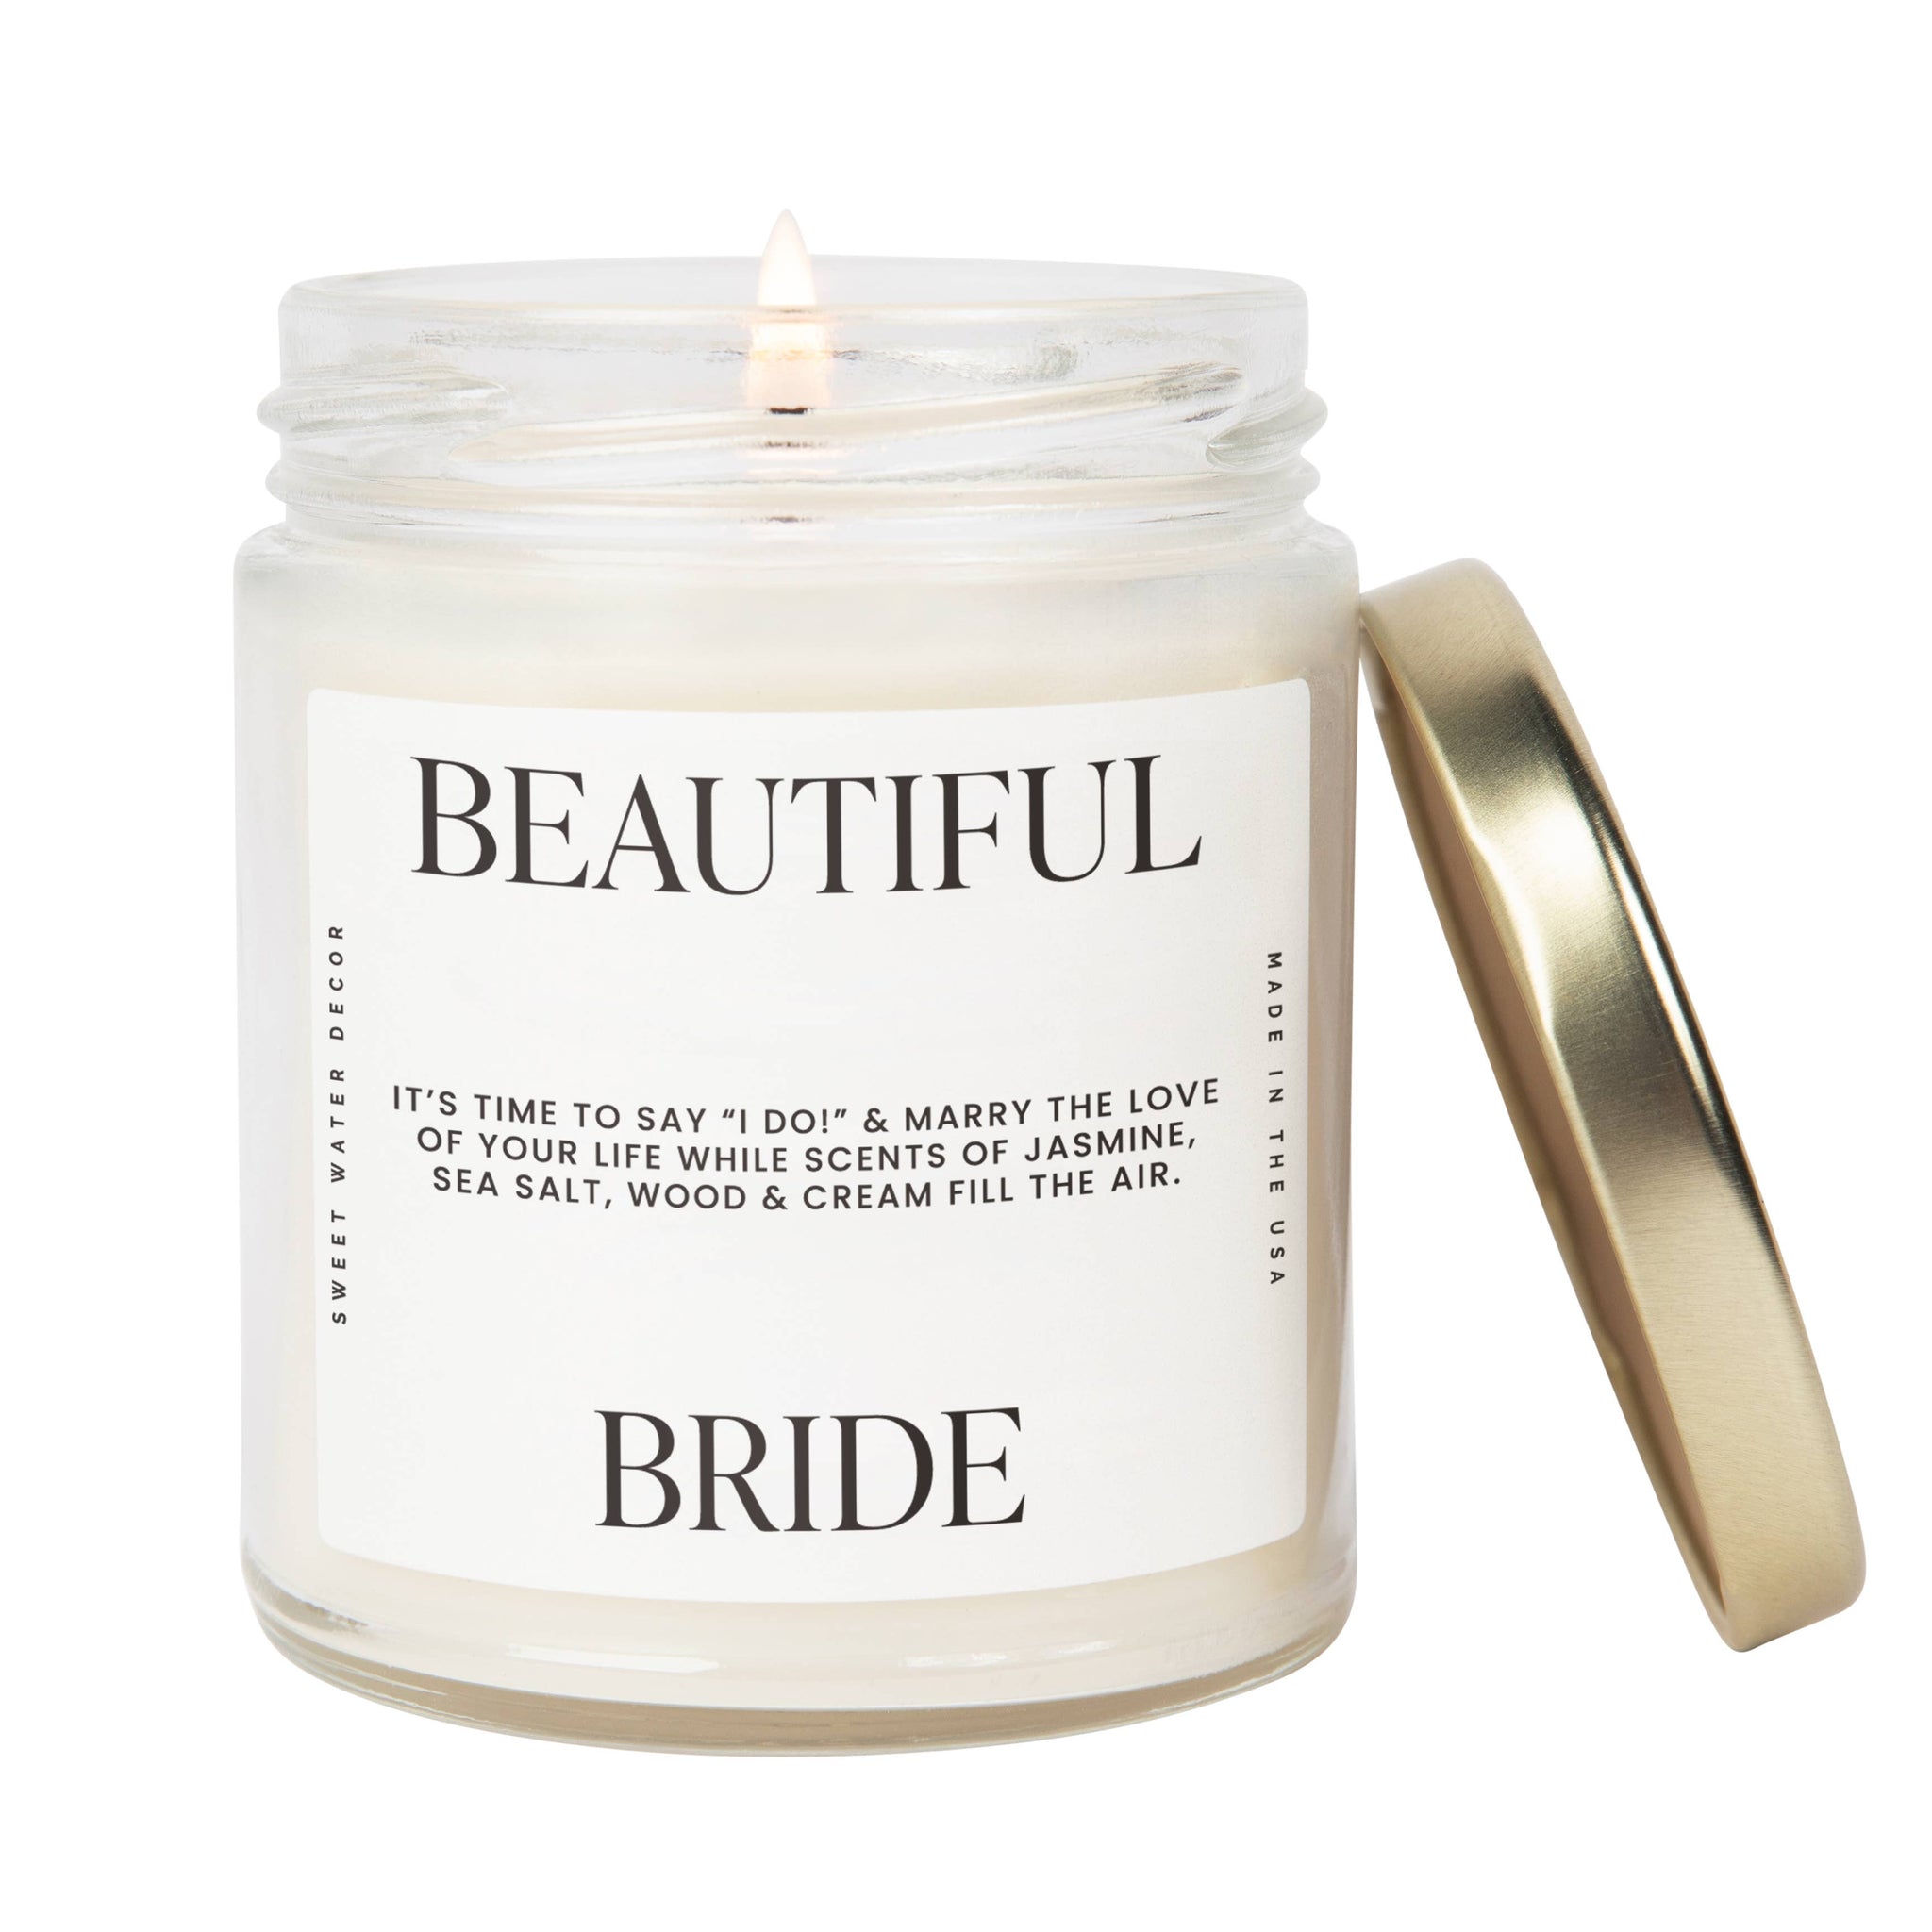 Beautiful Bride Soy Candle - 9 oz - Gifts & Home Decor